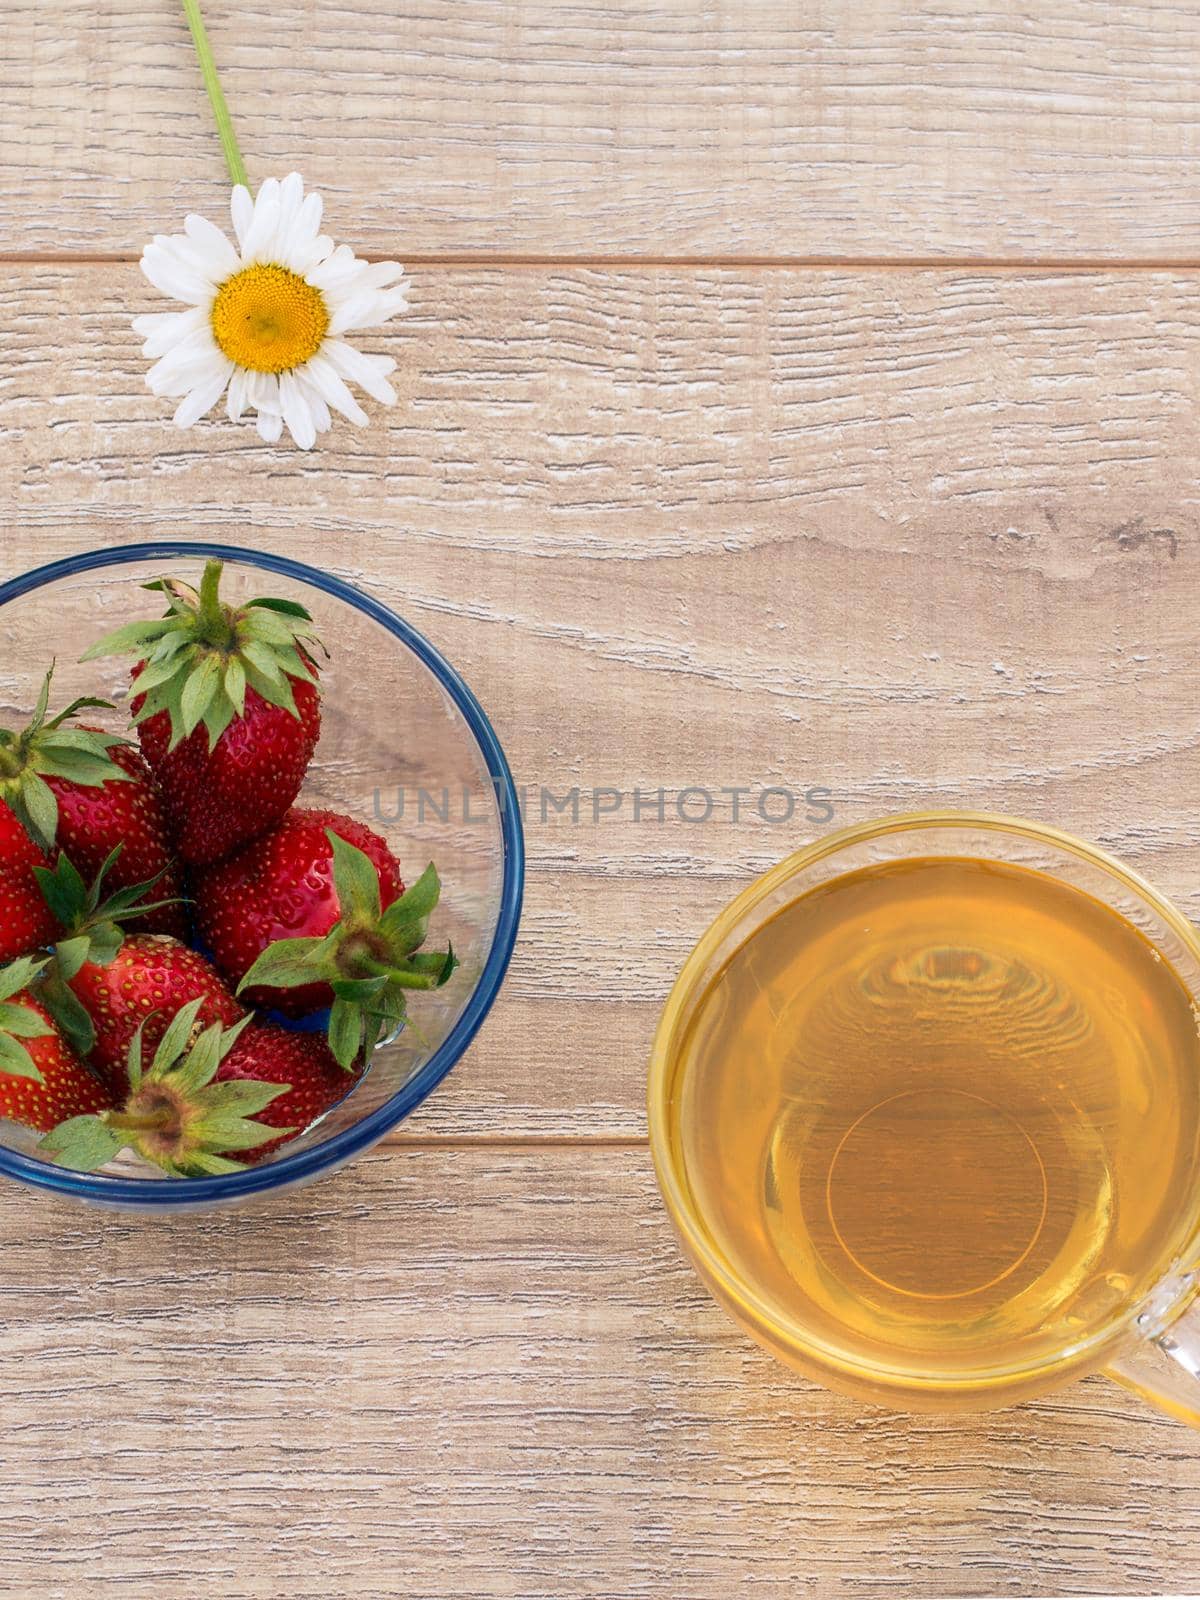 Glass cup of green tea, chamomile flower, glass bowl with fresh strawberries on the wooden boards. Top view.